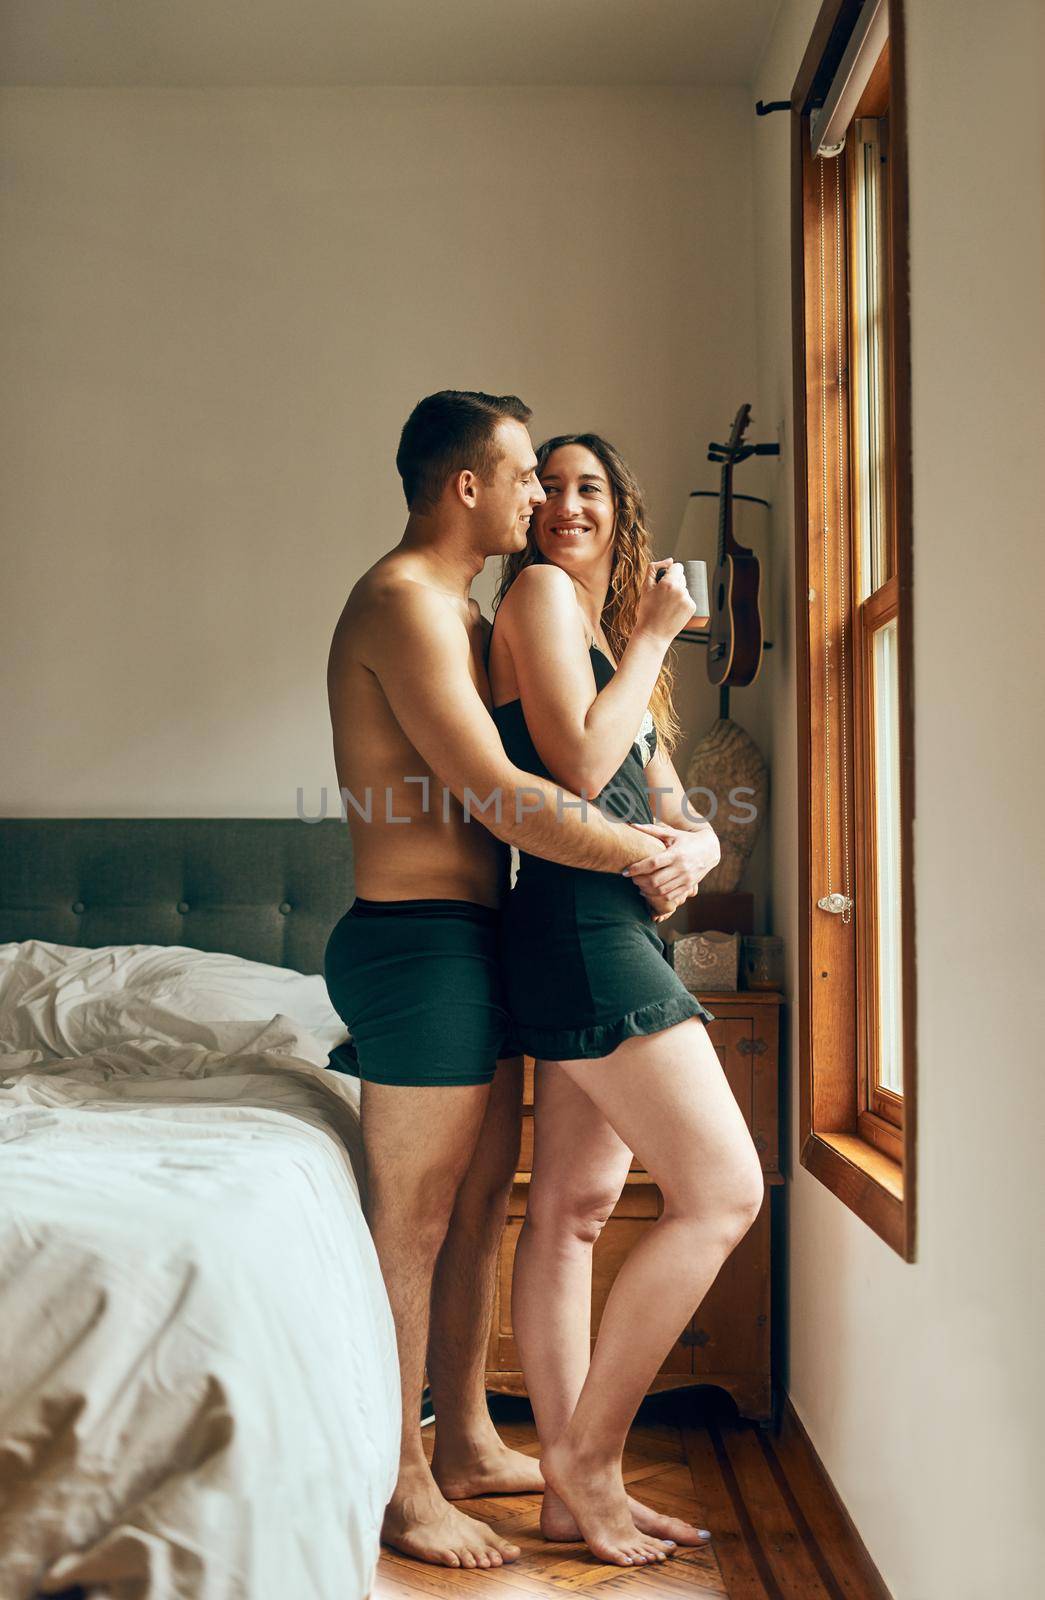 Romance makes the morning magical. an affectionate young couple having their morning coffee together in the bedroom at home